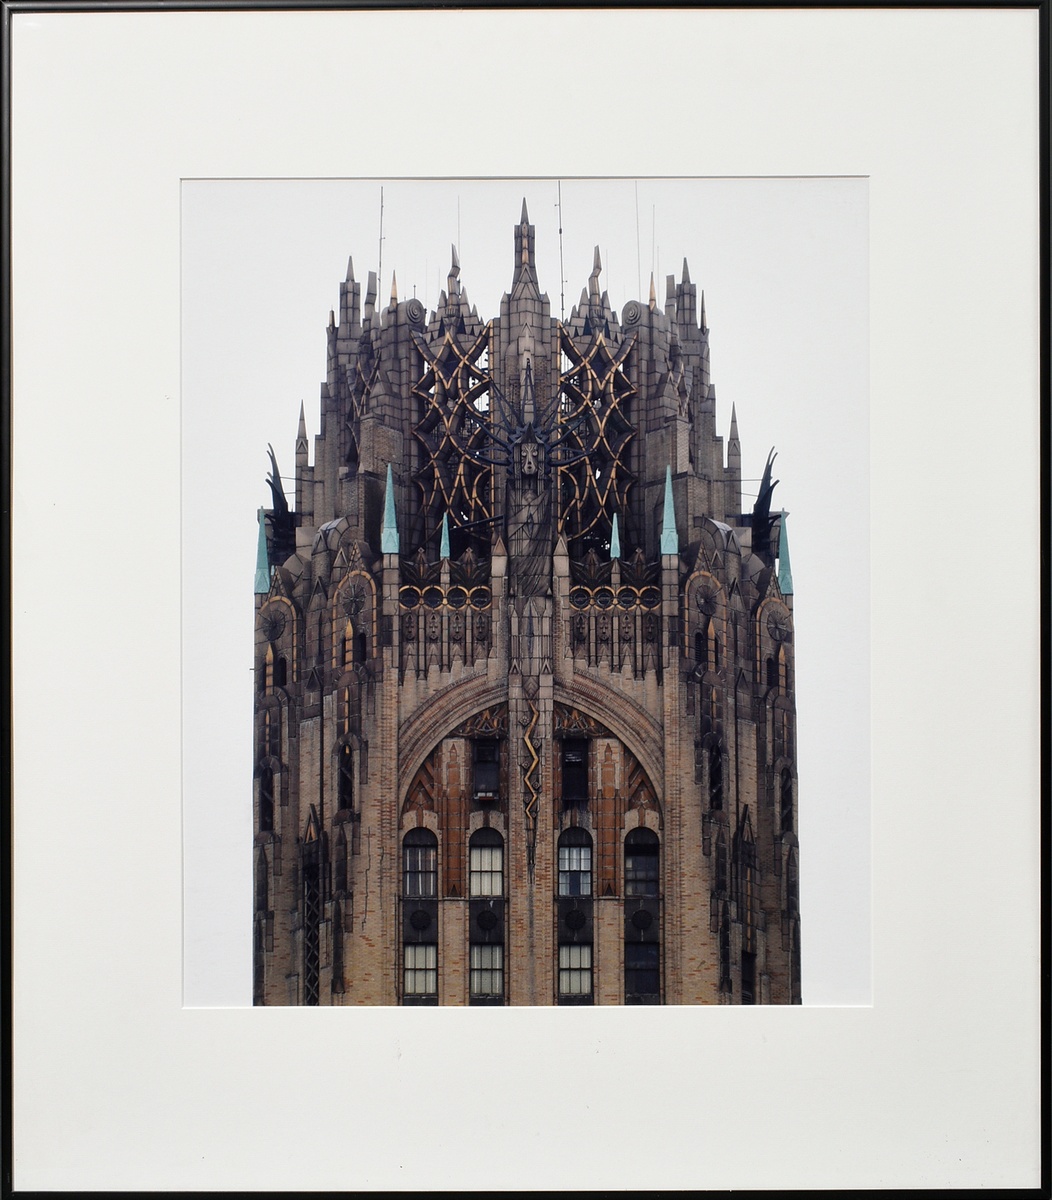 Wolf, Reinhart (1930-1988) ‘General Electric Building’ c. 1980, colour photograph on textured baryt - Image 2 of 4